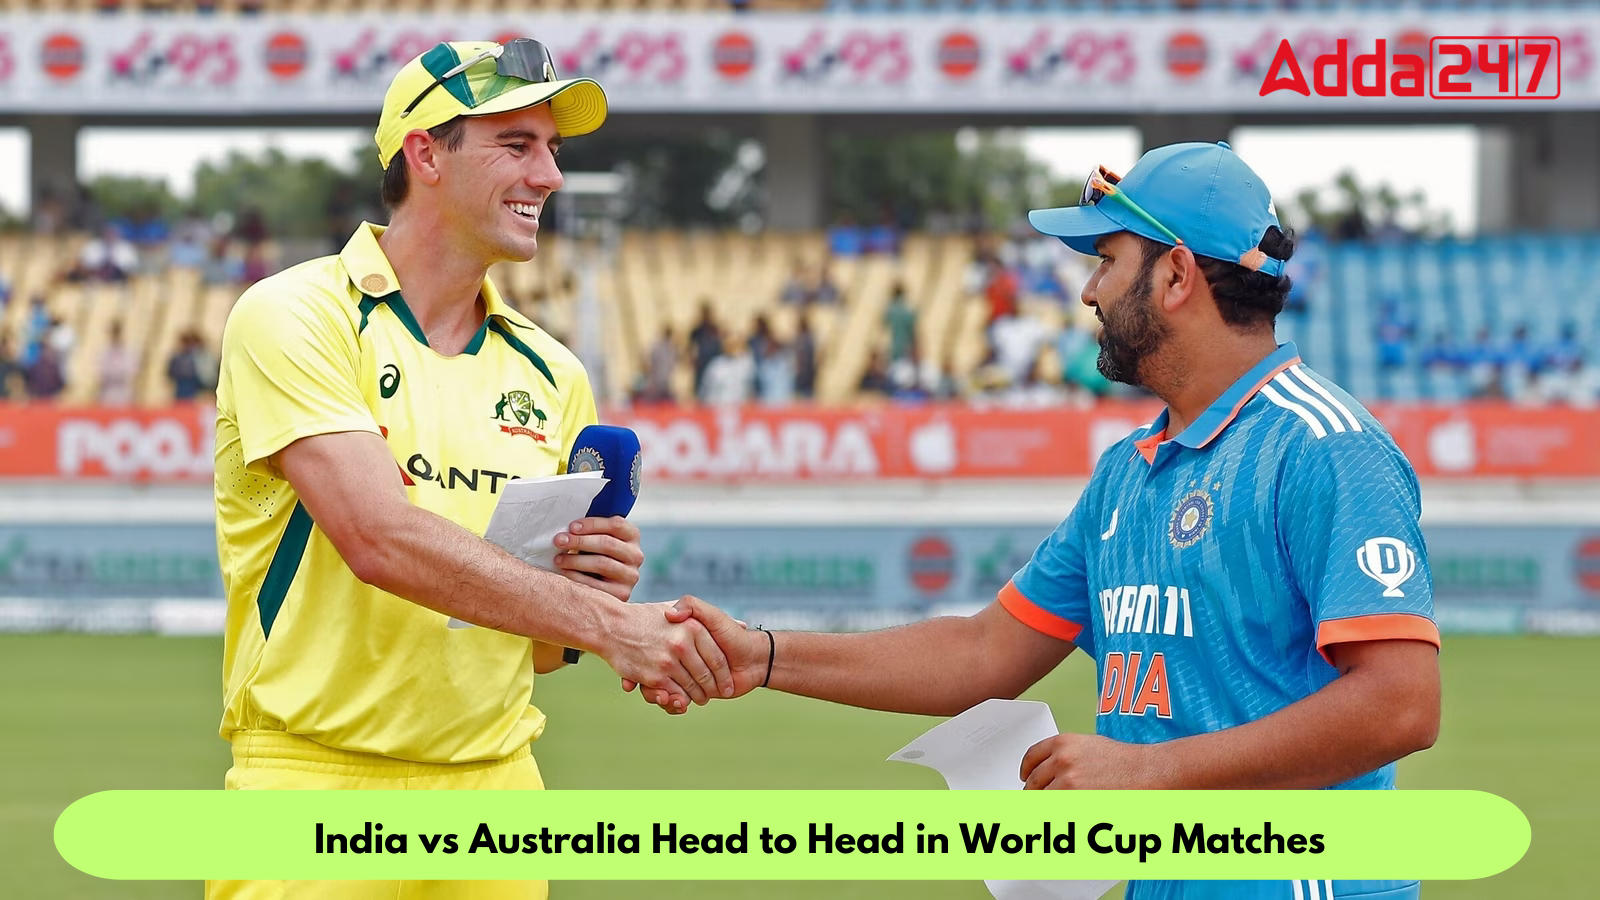 India vs Australia Head to Head in World Cup Matches